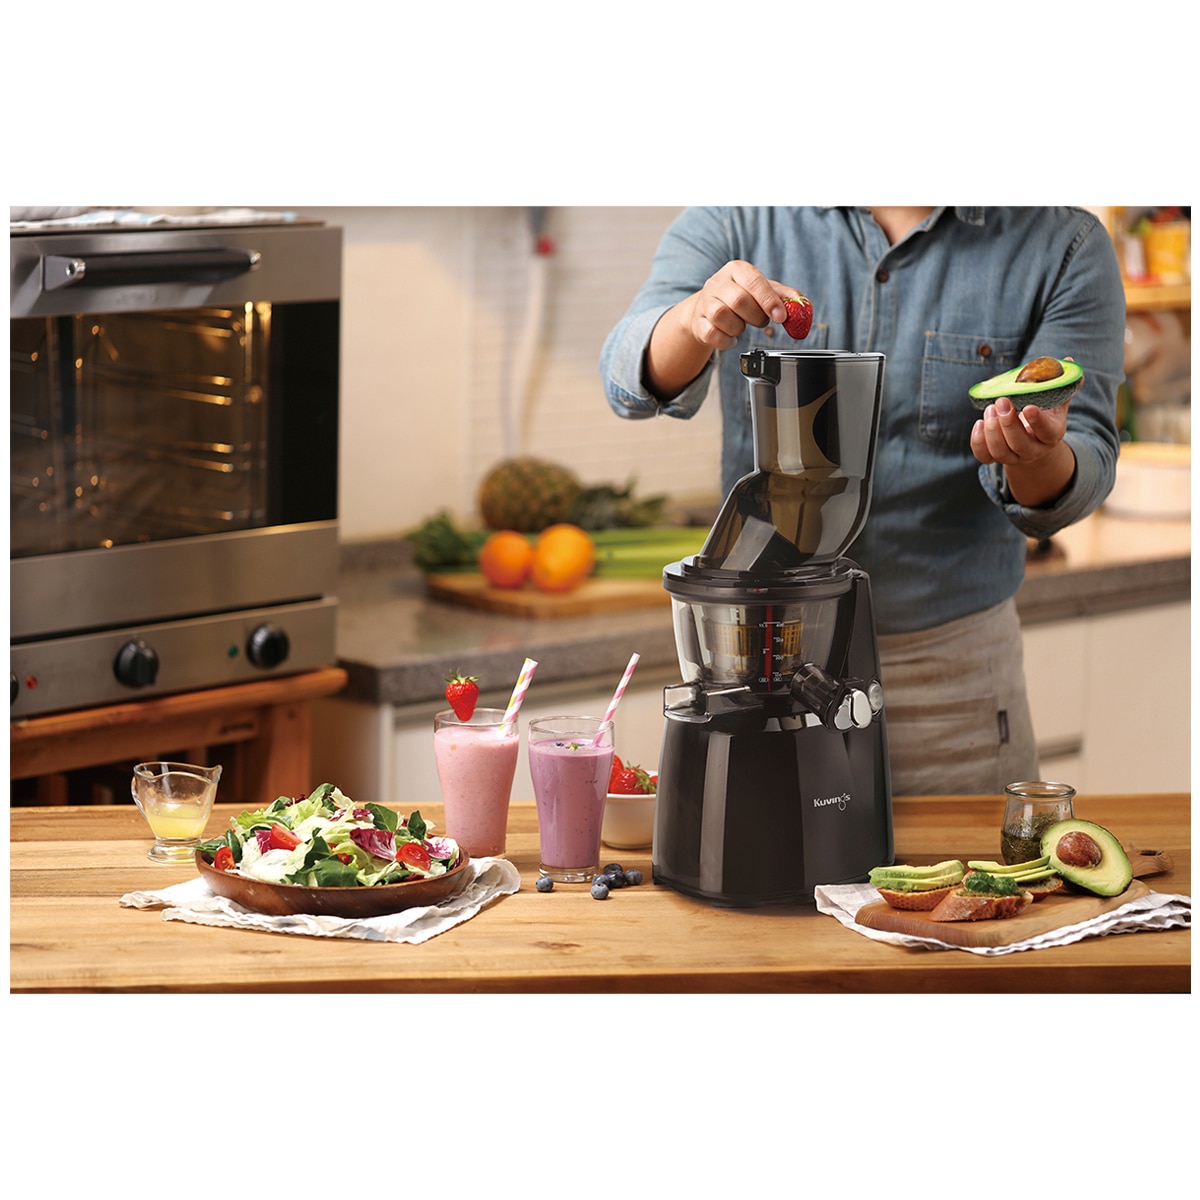 Kuvings E8000 Slow Juicer